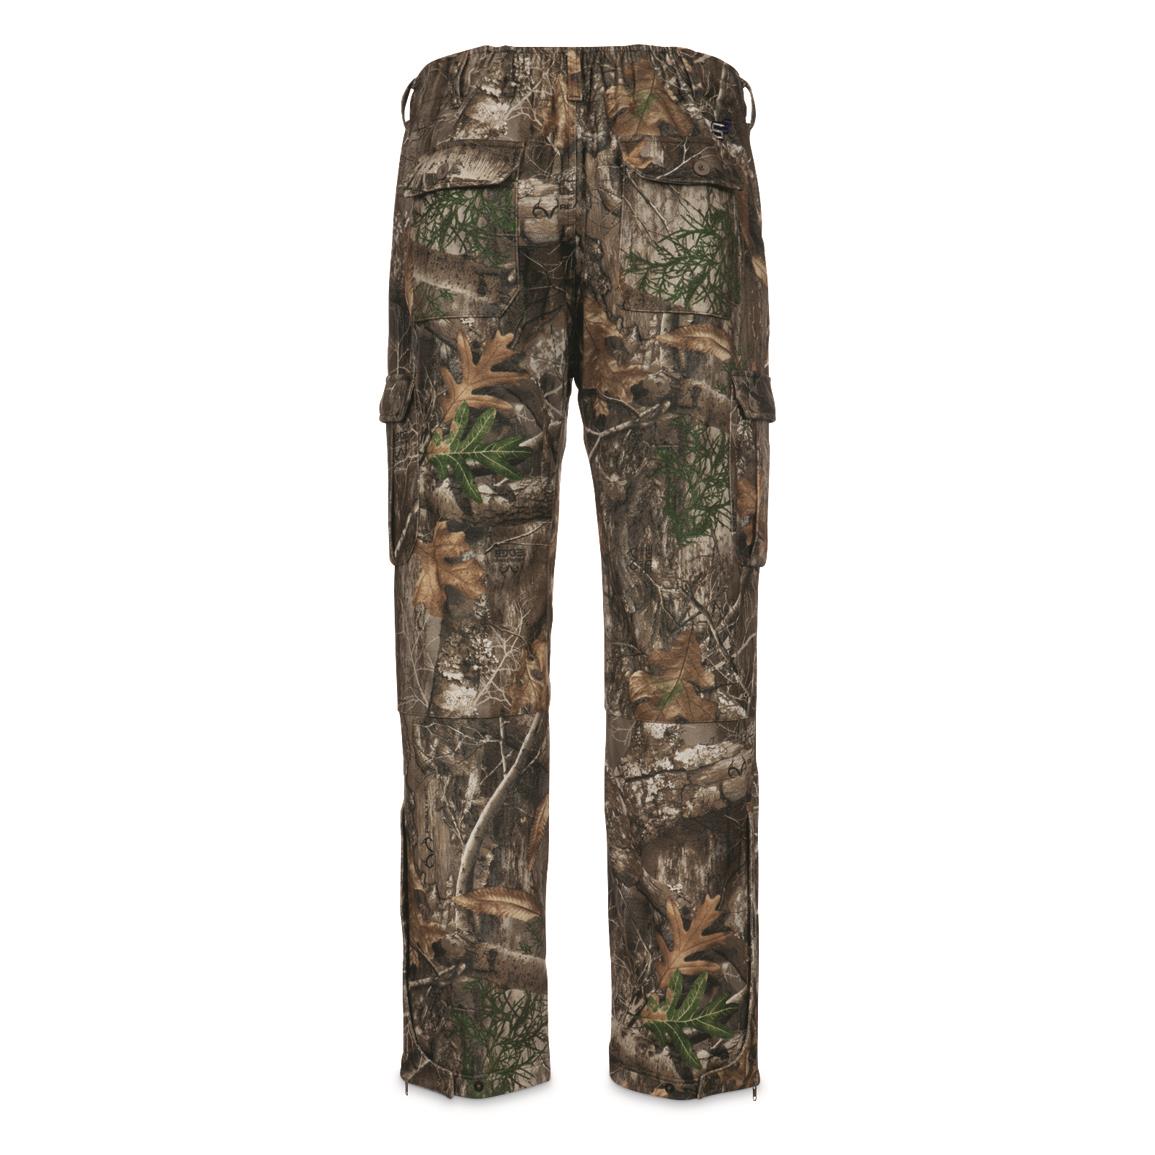 Gamehide Elimitick Cover-Up Pants, Realtree Xtra - 235464, Camo Pants ...